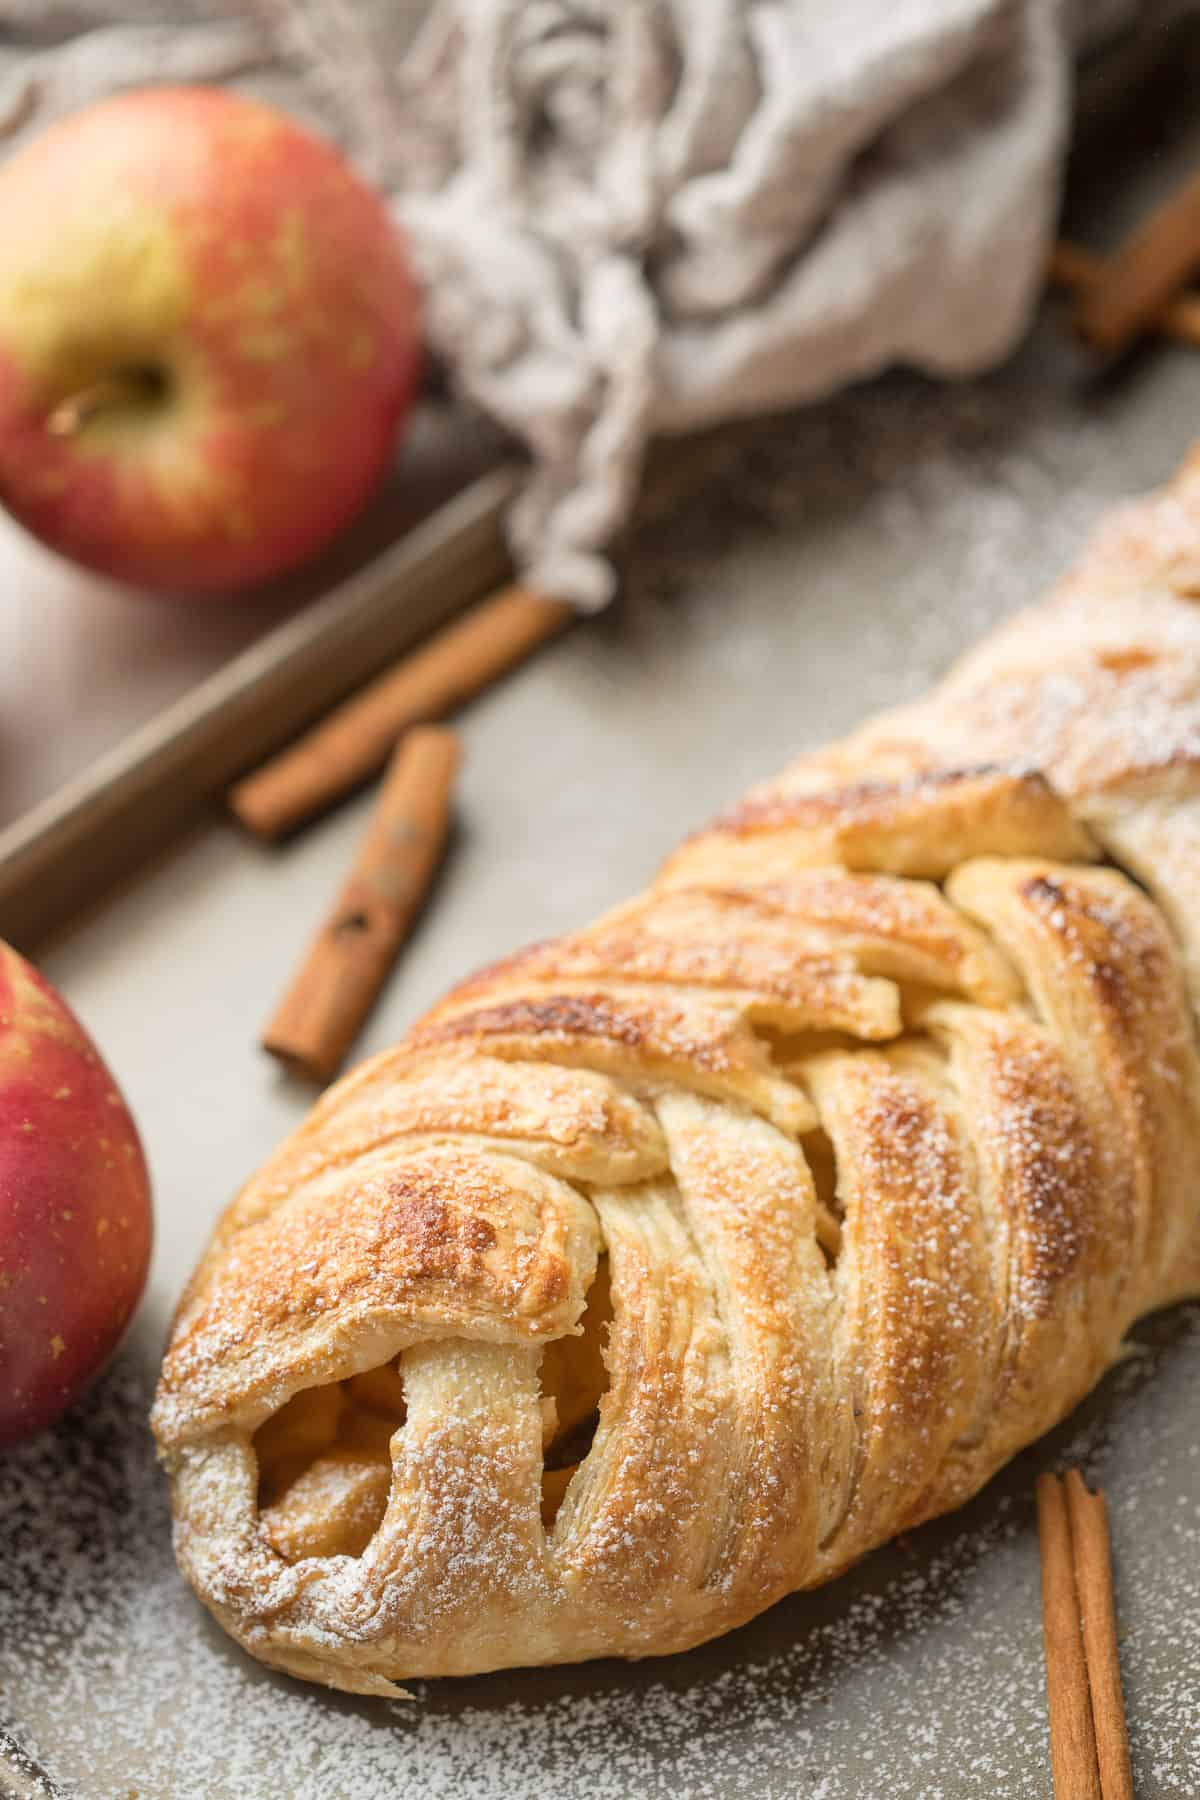 Vegan Apple Strudel on a baking sheet with apples and cinnamon sticks.